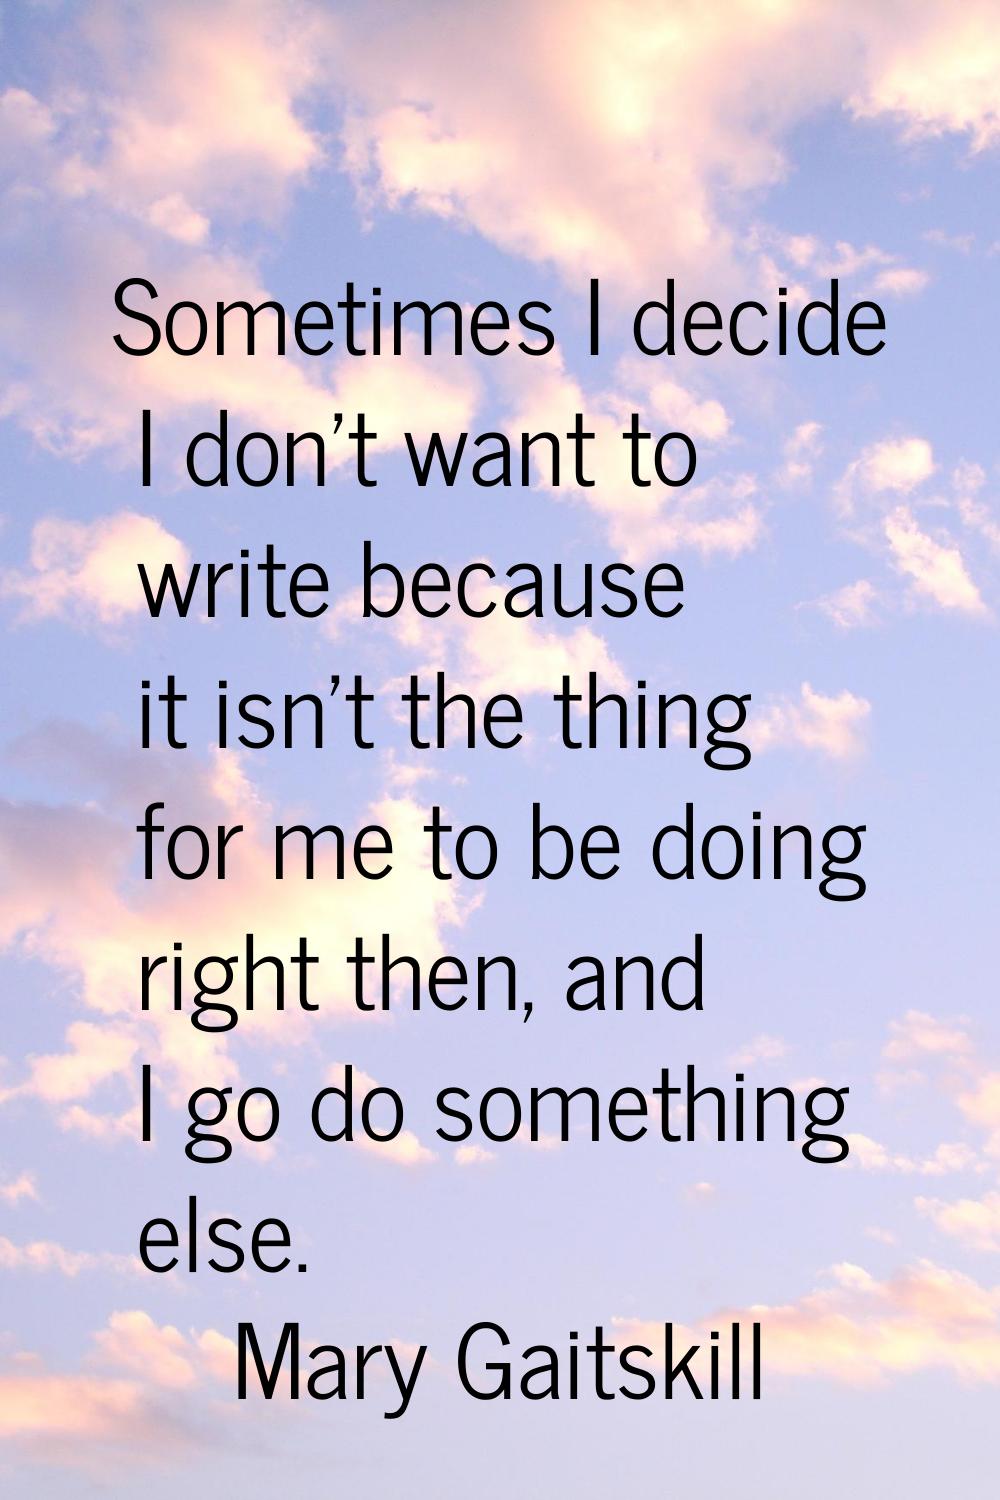 Sometimes I decide I don't want to write because it isn't the thing for me to be doing right then, 